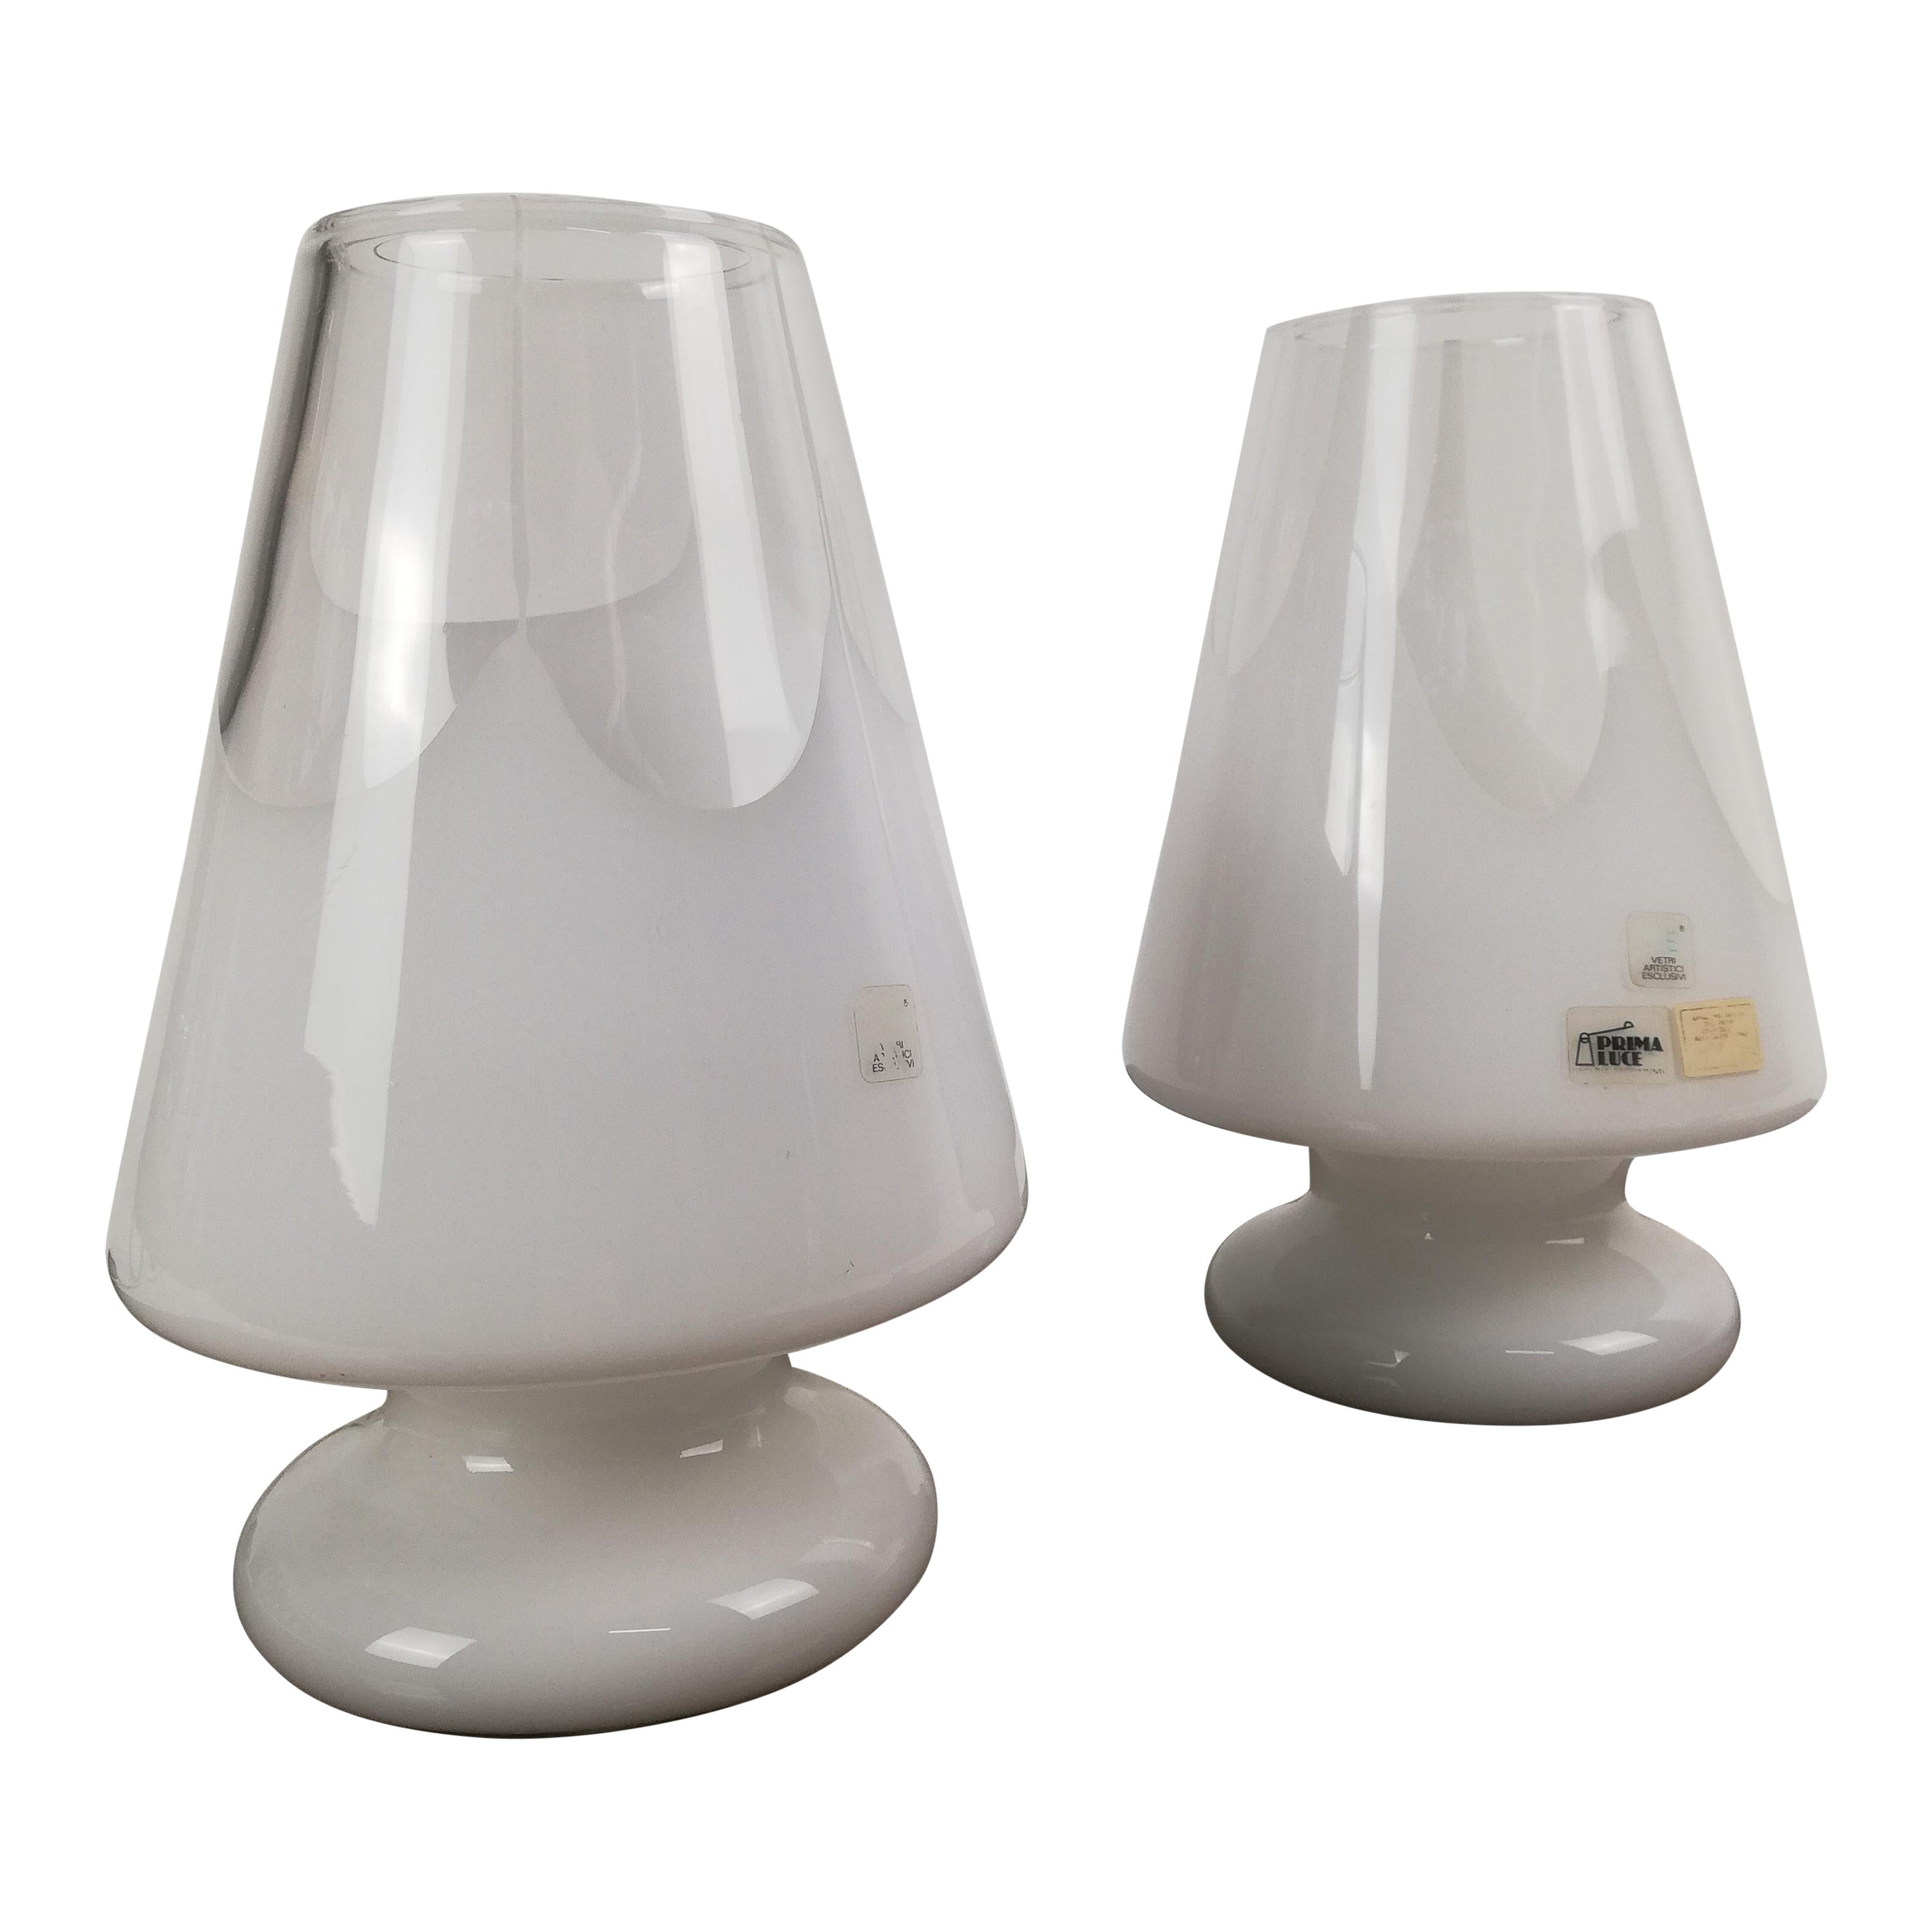 Pair of Table Lamps by Prima Luce in White Artistic Murano Glass, Italy, 1970s For Sale